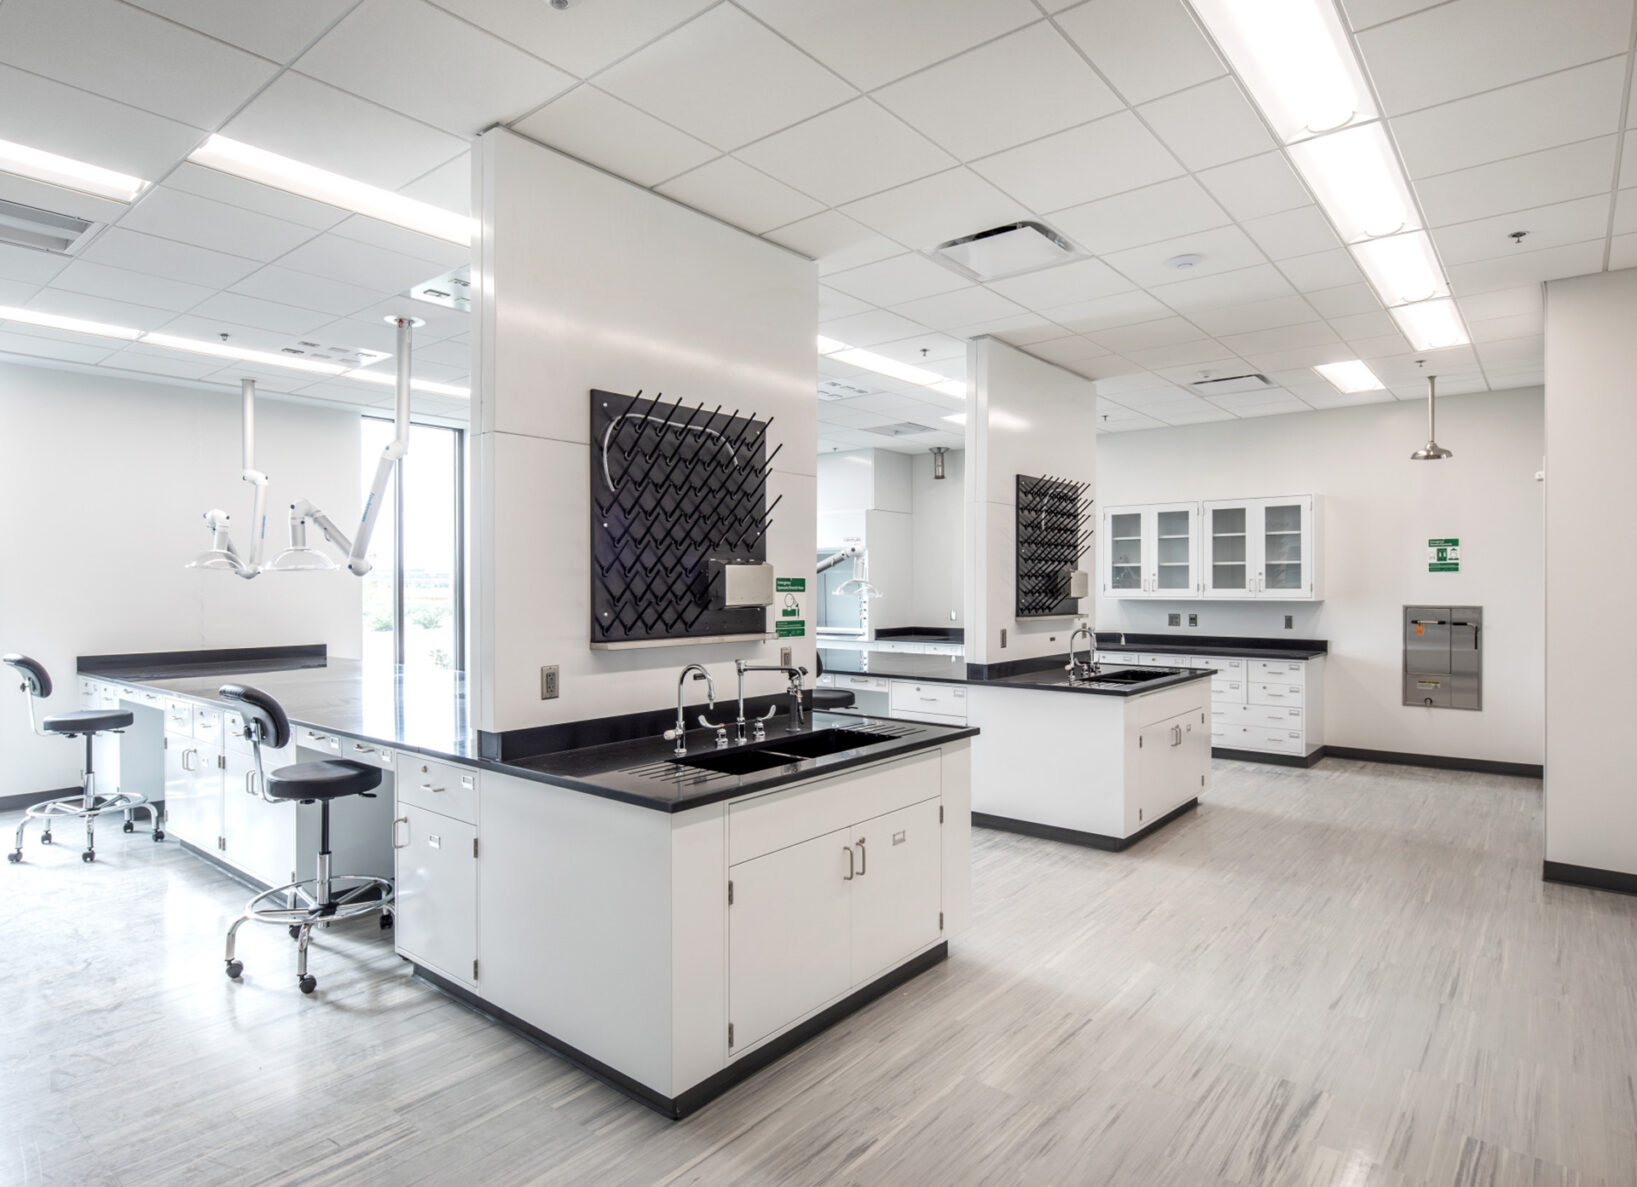 Labs at the POET Bioproducts Institute at SOuth Dakota State University built by McCownGordon Construction